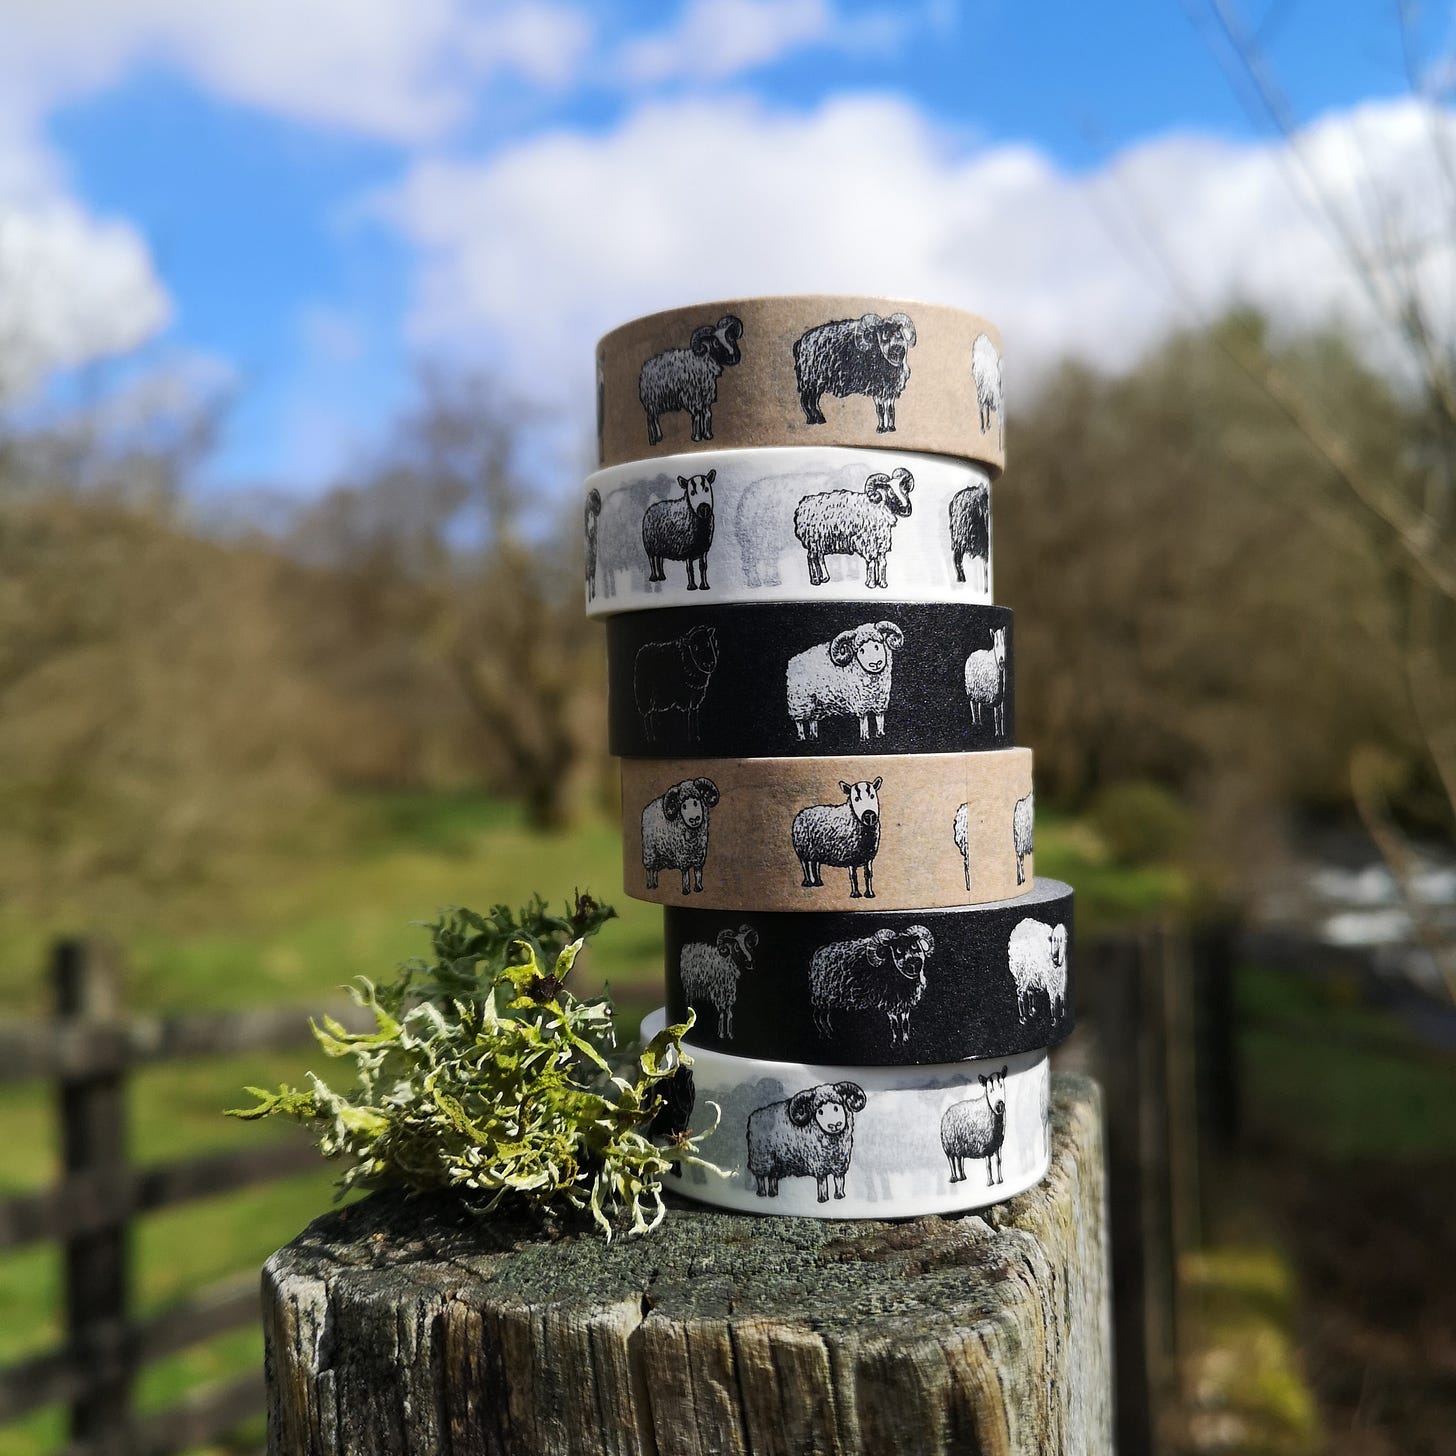 Image description: a tower of washi tape rolls stacked on top of a fence post, with a piece of green lichen next to them and bright blue sky and fluffy white clouds behind. The washi tape rolls depict a variety of sheep, including in this photo: Shetland, Dorset Horn, Torddu Badger Face and Boreray. The tapes have different background colours, from the bottom of the stack they go white, black, brown, black, white, brown.